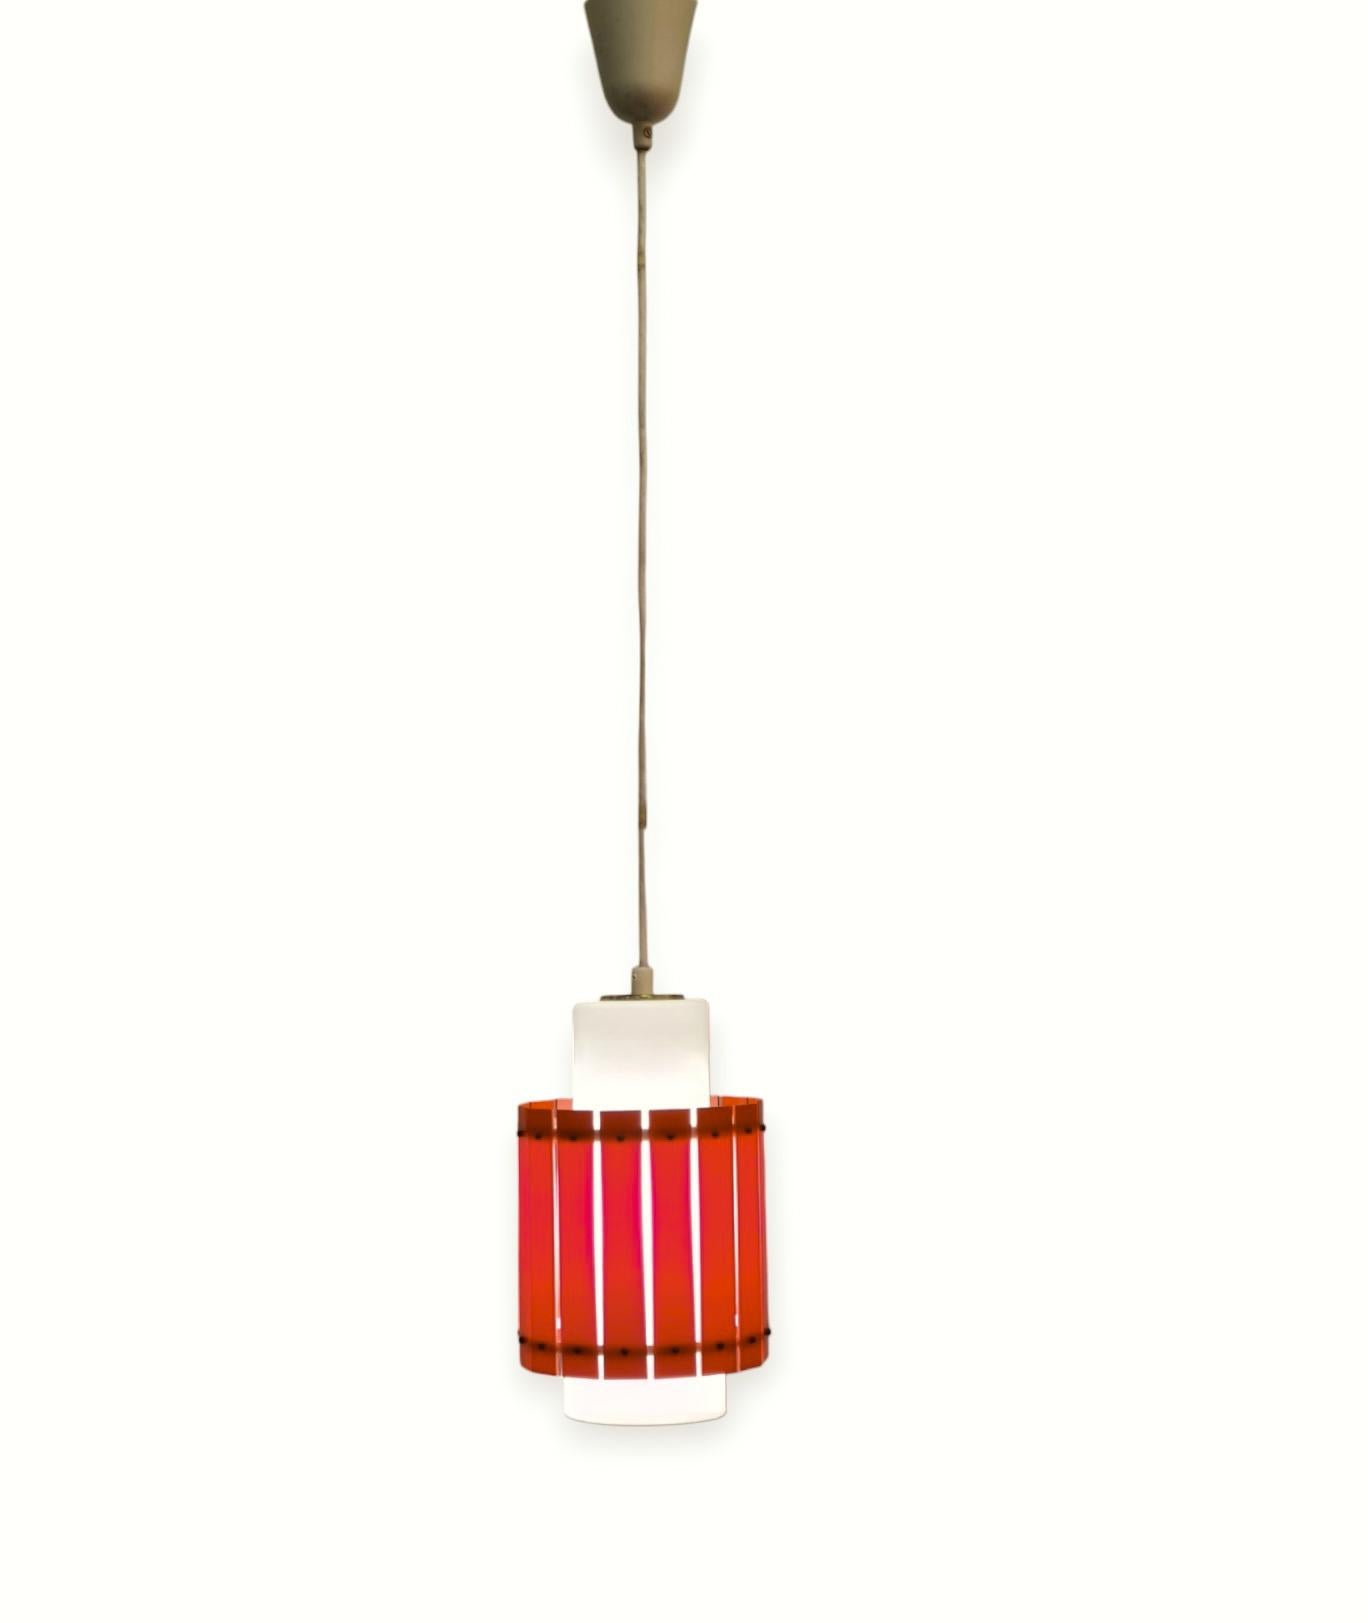 Cheerful Red Ceiling Pendant Model K2-74 by Maria Lindeman for Idman, 1960s For Sale 2